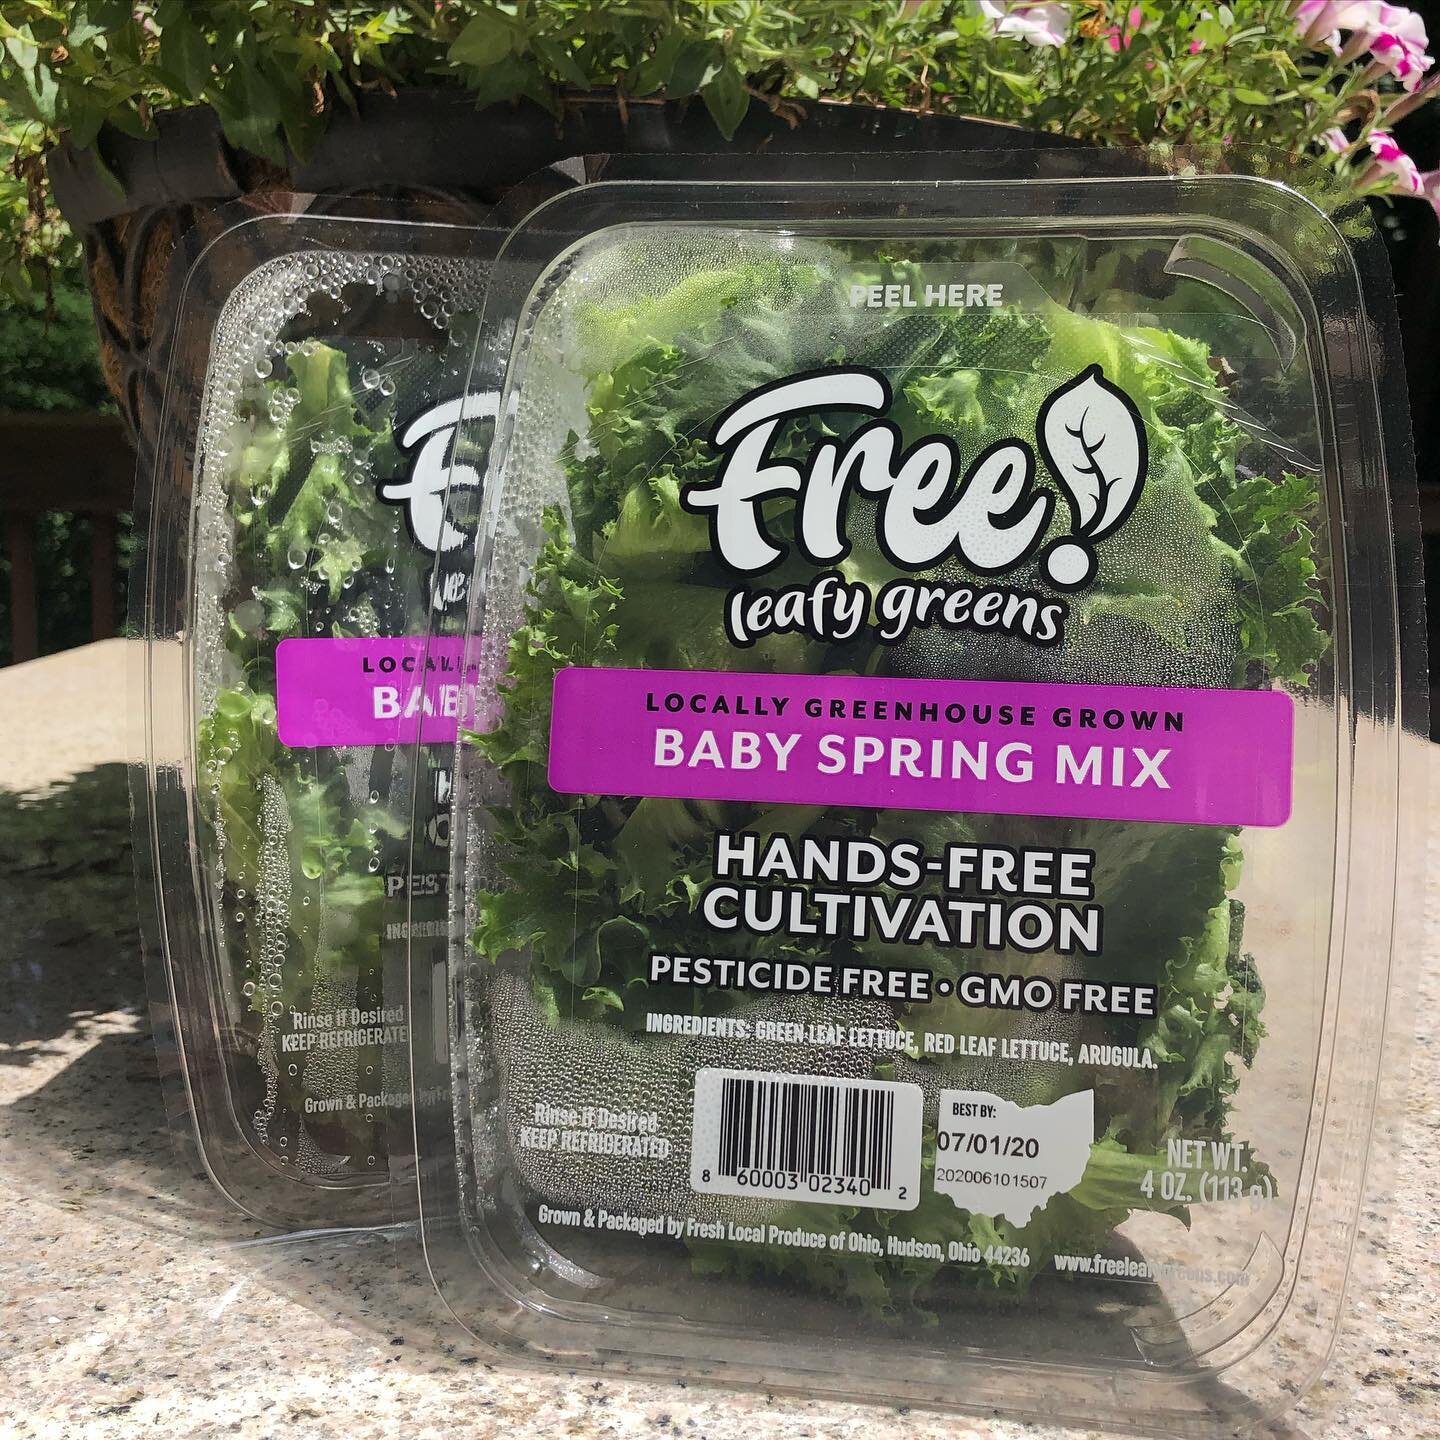 Safe from seeding to packaging &bull; These leafy greens journey through an automated system from seed to leaf! #handsfreecultivation to give you peace of mind 🌱

#foodsafety #ohiolocal #ohiofarm #shoplocal #freshproduce